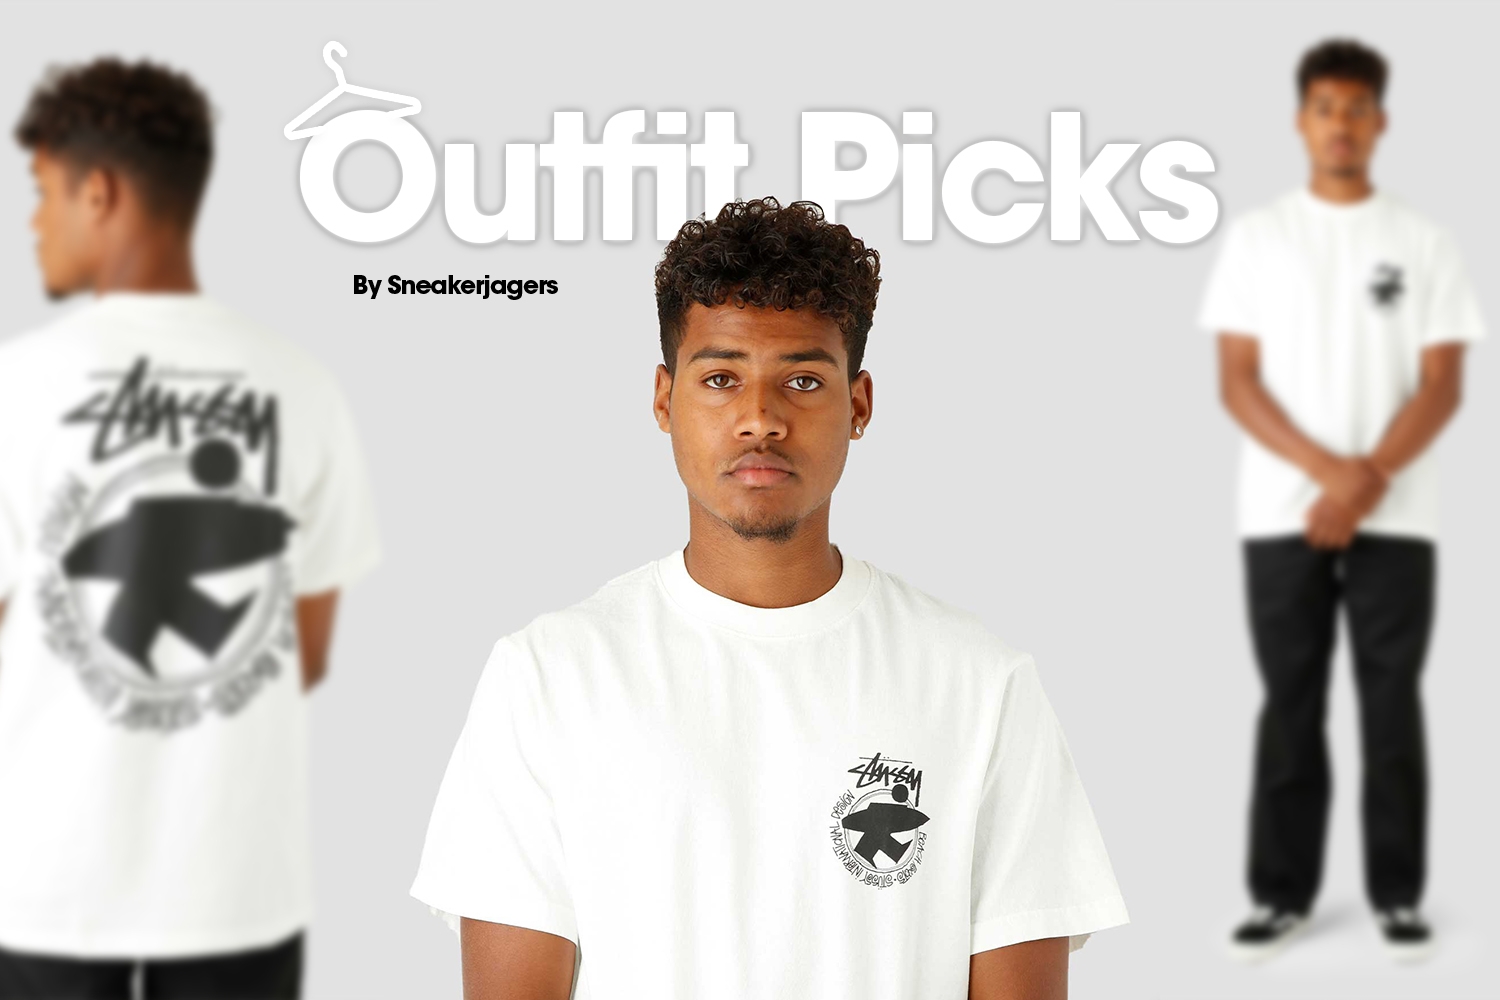 Outfit Picks by FotomagazinShops - week 26